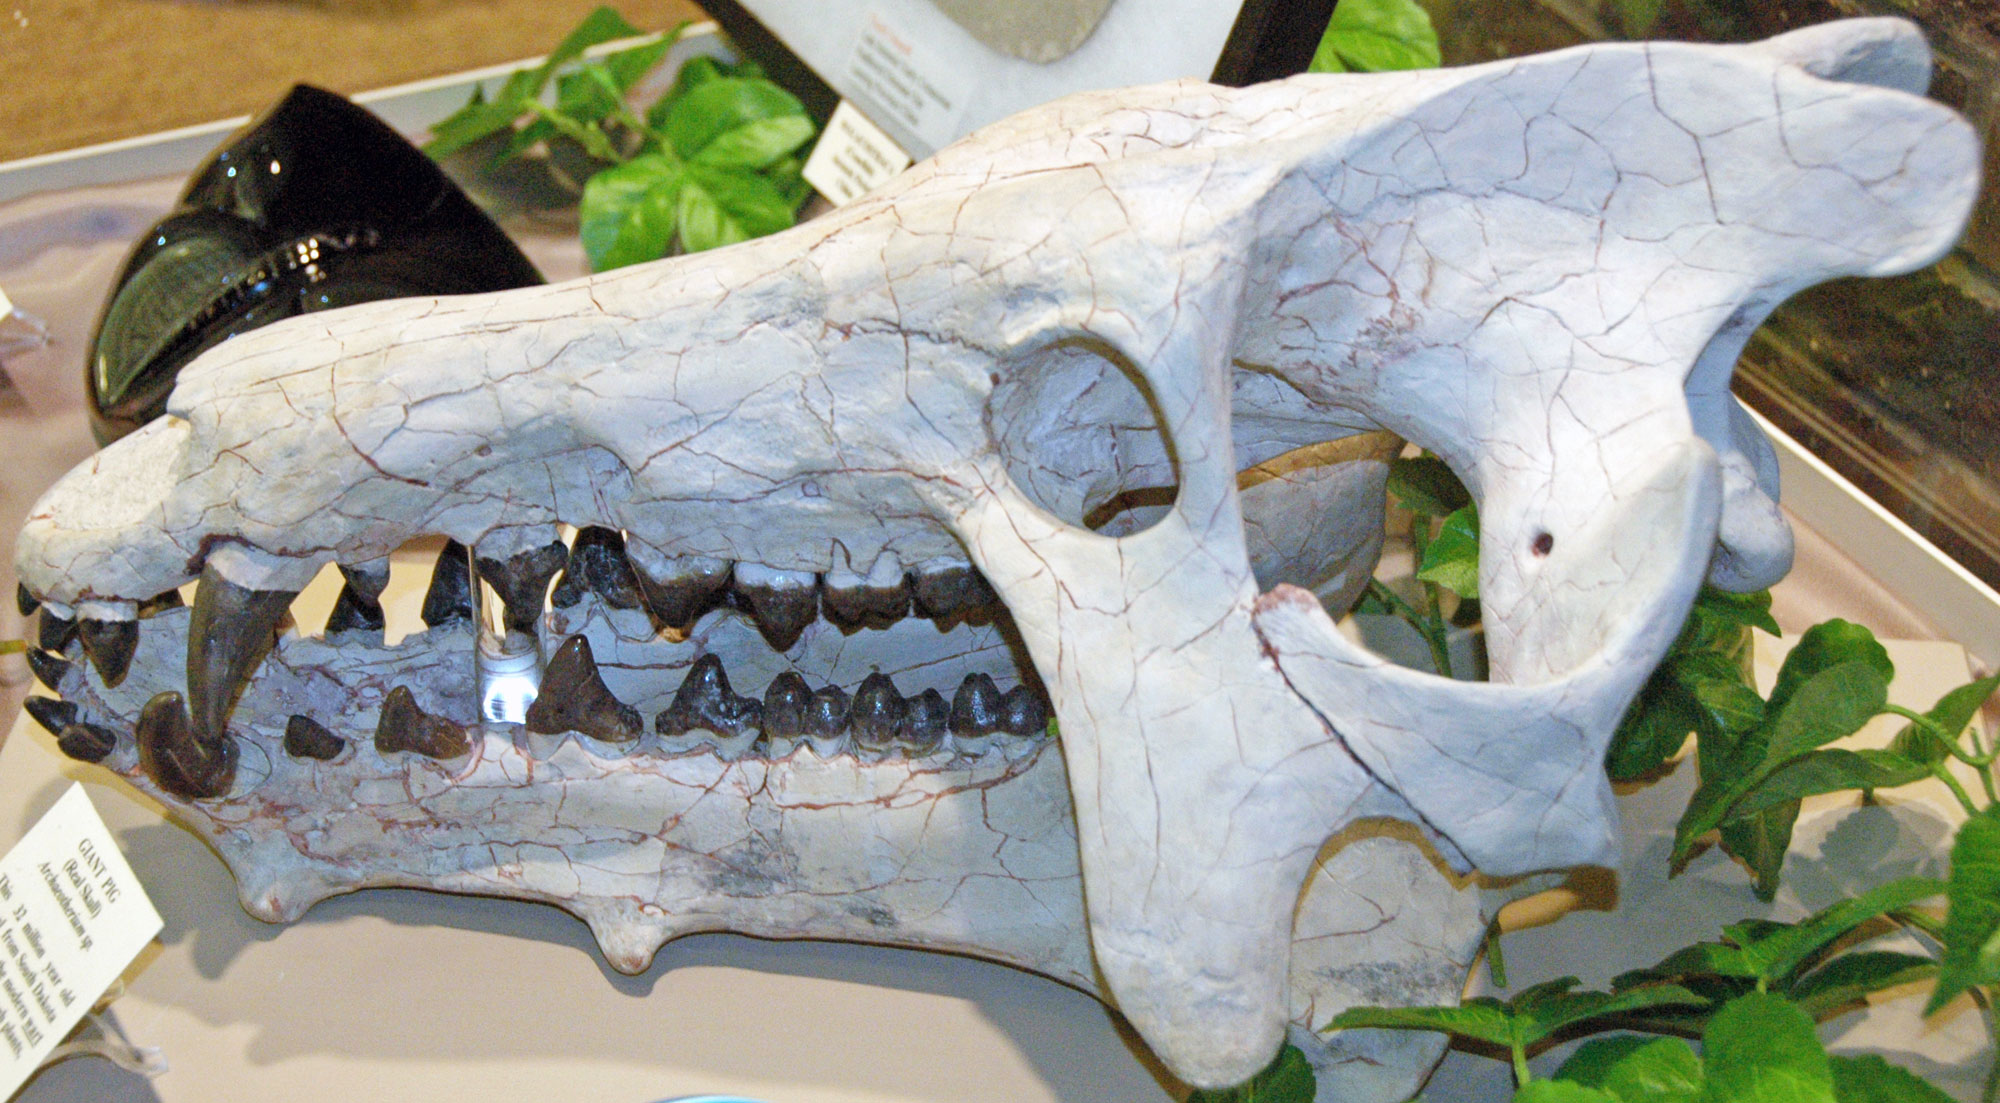 Photograph of a skull of an entelodont or hell pig from the Oligocene White River Group of South Dakota on display in a museum. The photo shows a robust white skull with sharp brown teeth sitting on a table and surrounded by plants. The nose is pointed left. The skull has a long snout with large pointed canines.